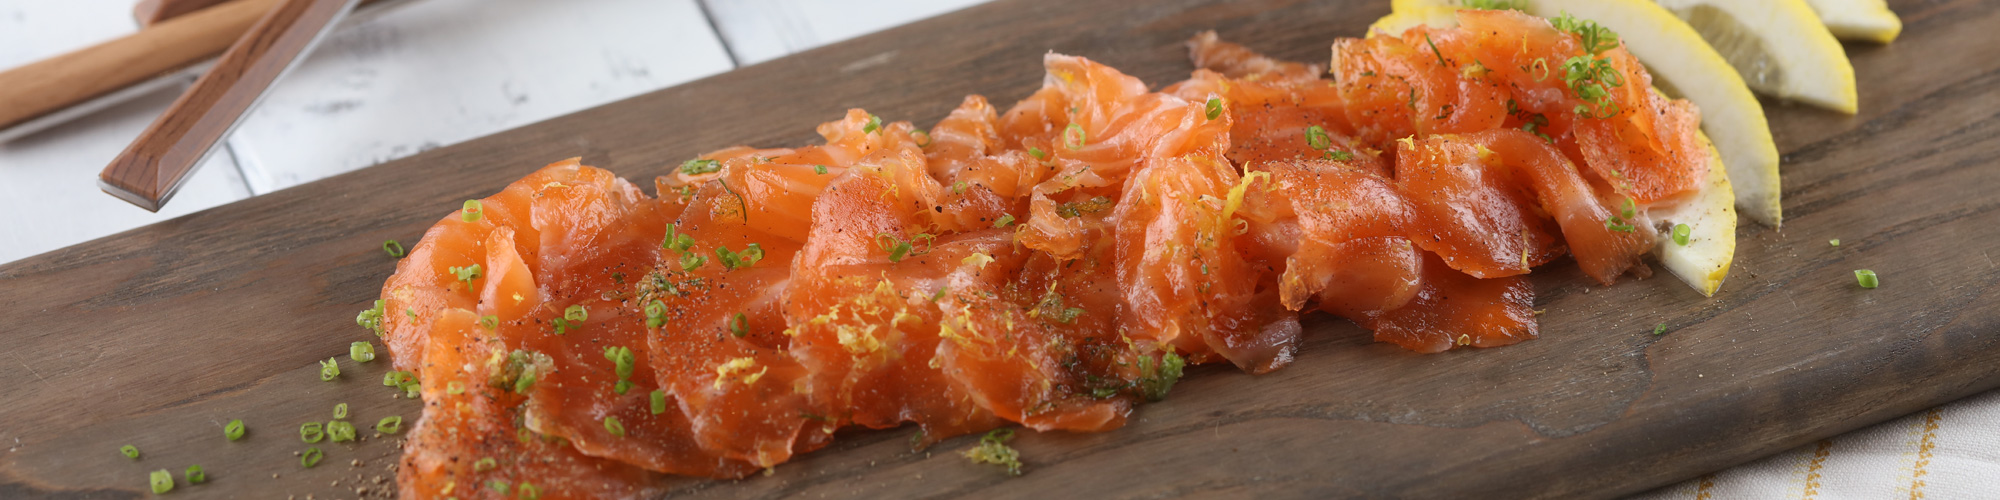 Dill and Citrus Cured Salmon